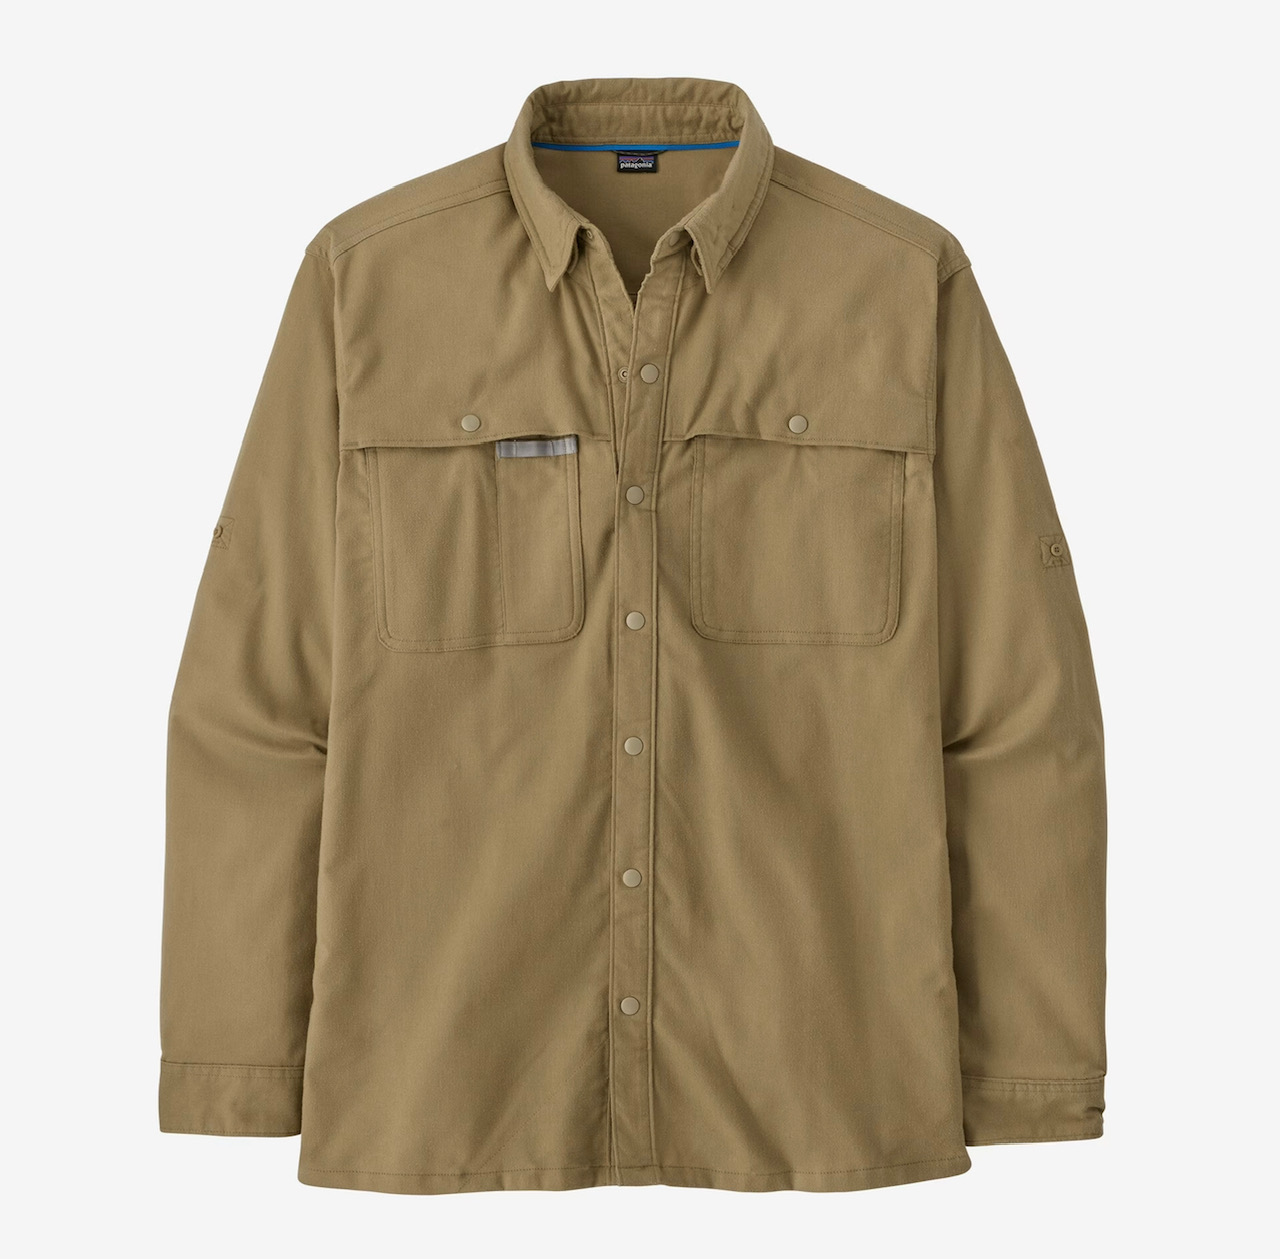 Patagonia M's Early Rise Stretch Shirt - Classic Tan - Large